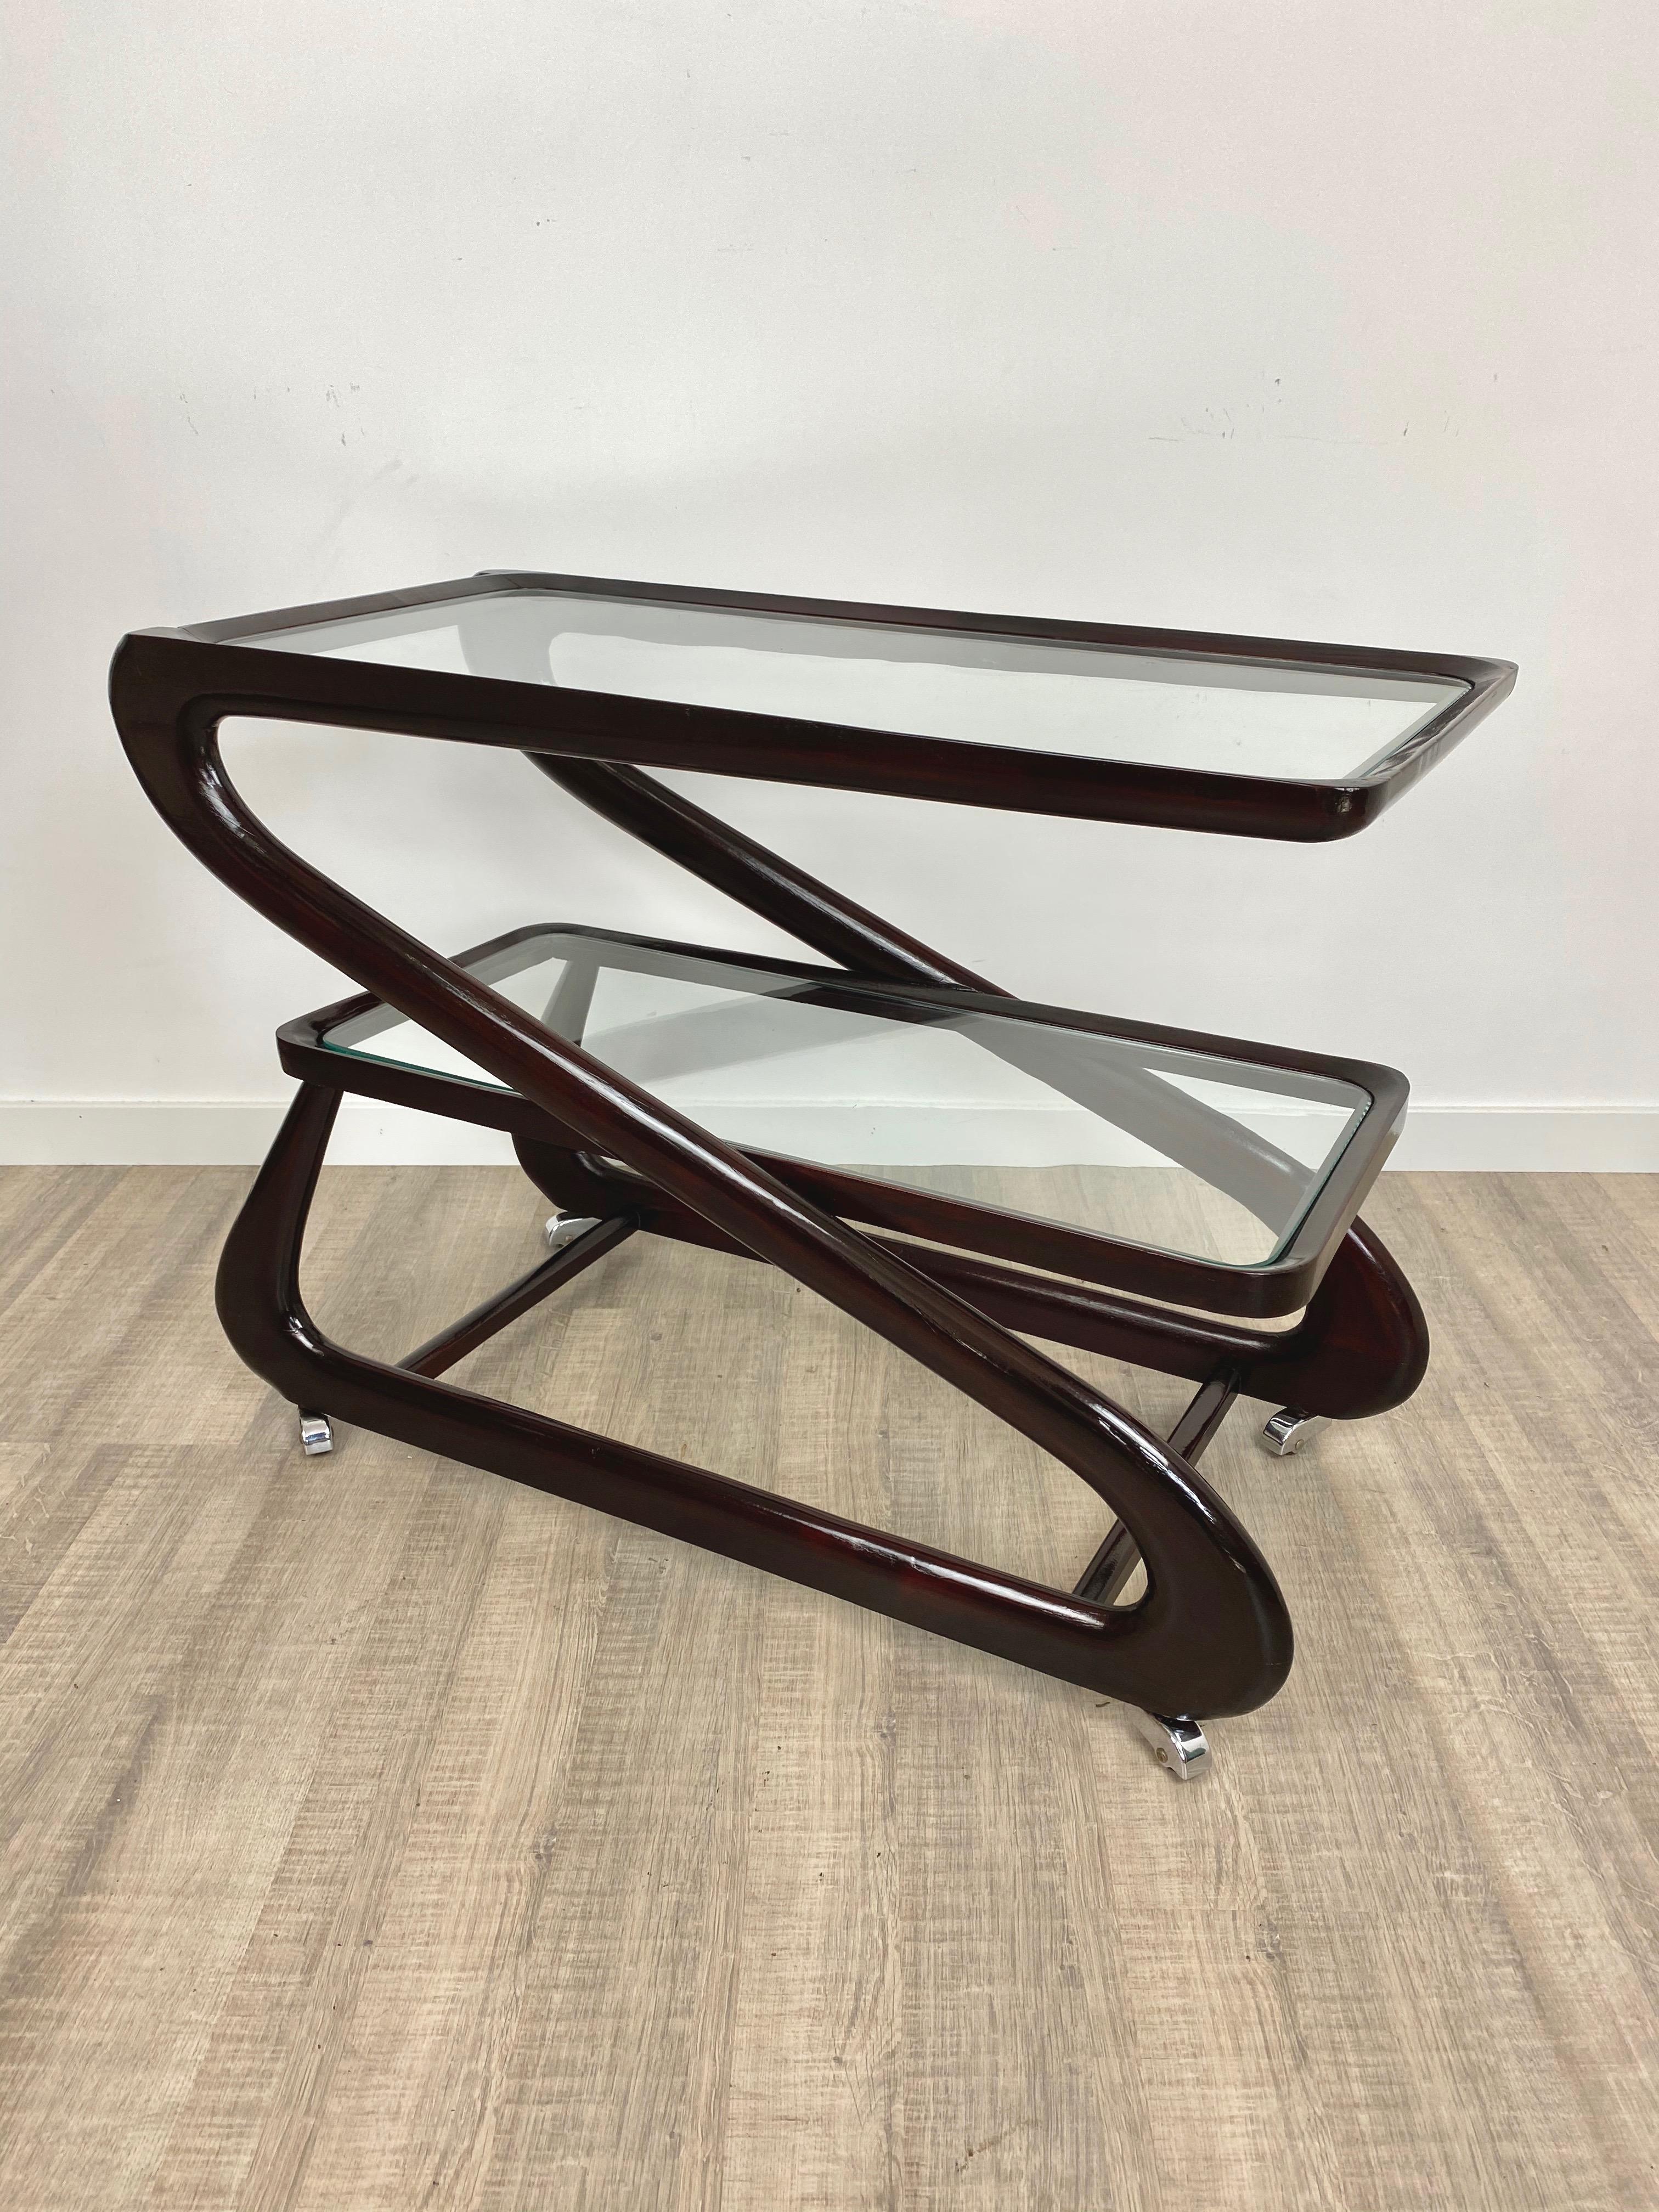 Serving bar cart featuring two glass shelves, in a mahogany wood dynamic structure, by the Italian designer Cesare Lacca. Made in Italy, circa 1950.